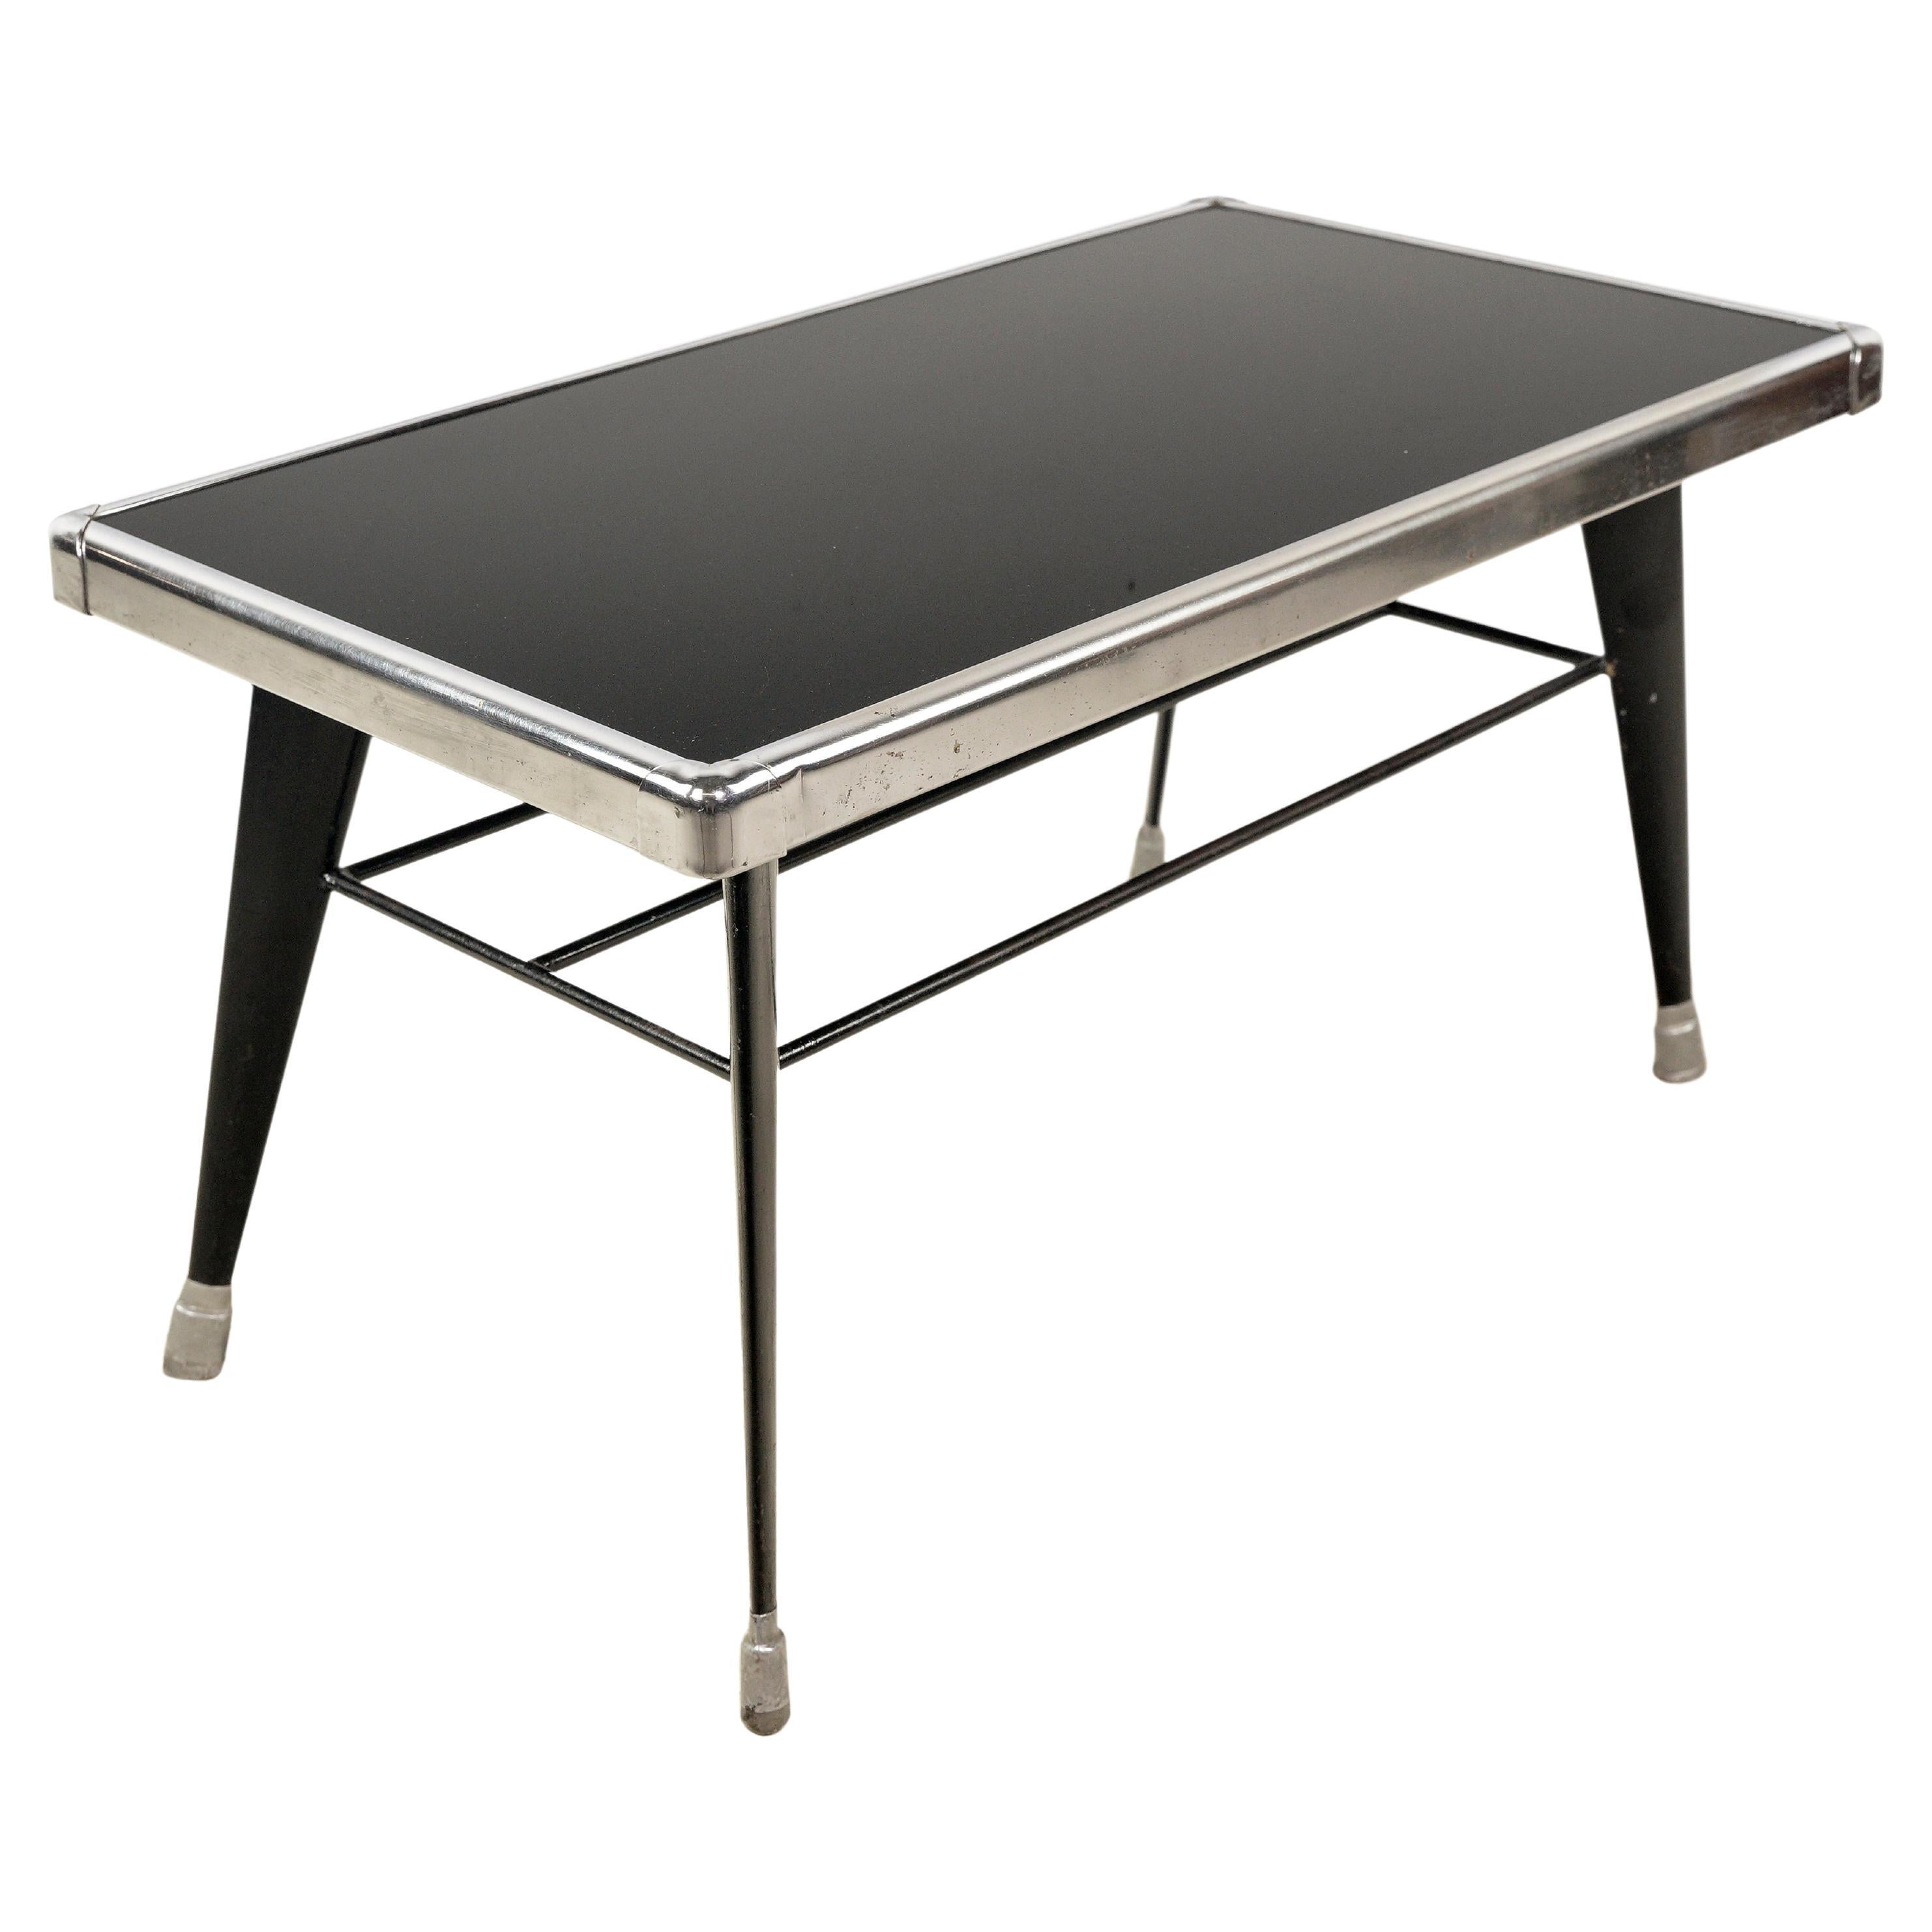 1950s Mid-Century Modern Black Glass & Steel Coffee Table For Sale